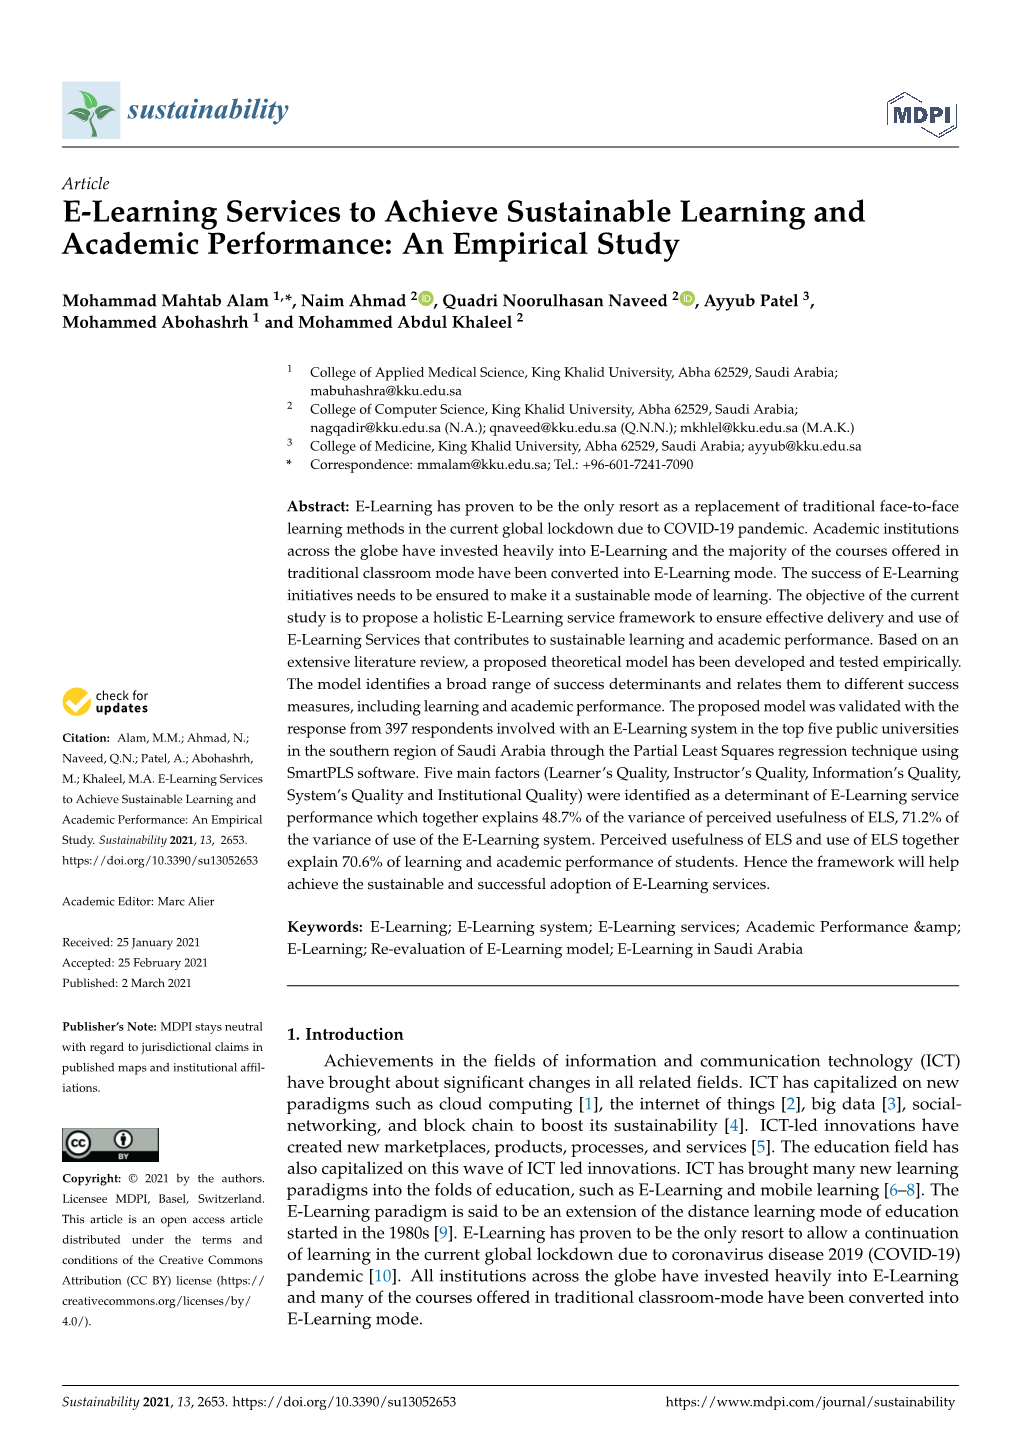 E-Learning Services to Achieve Sustainable Learning and Academic Performance: an Empirical Study